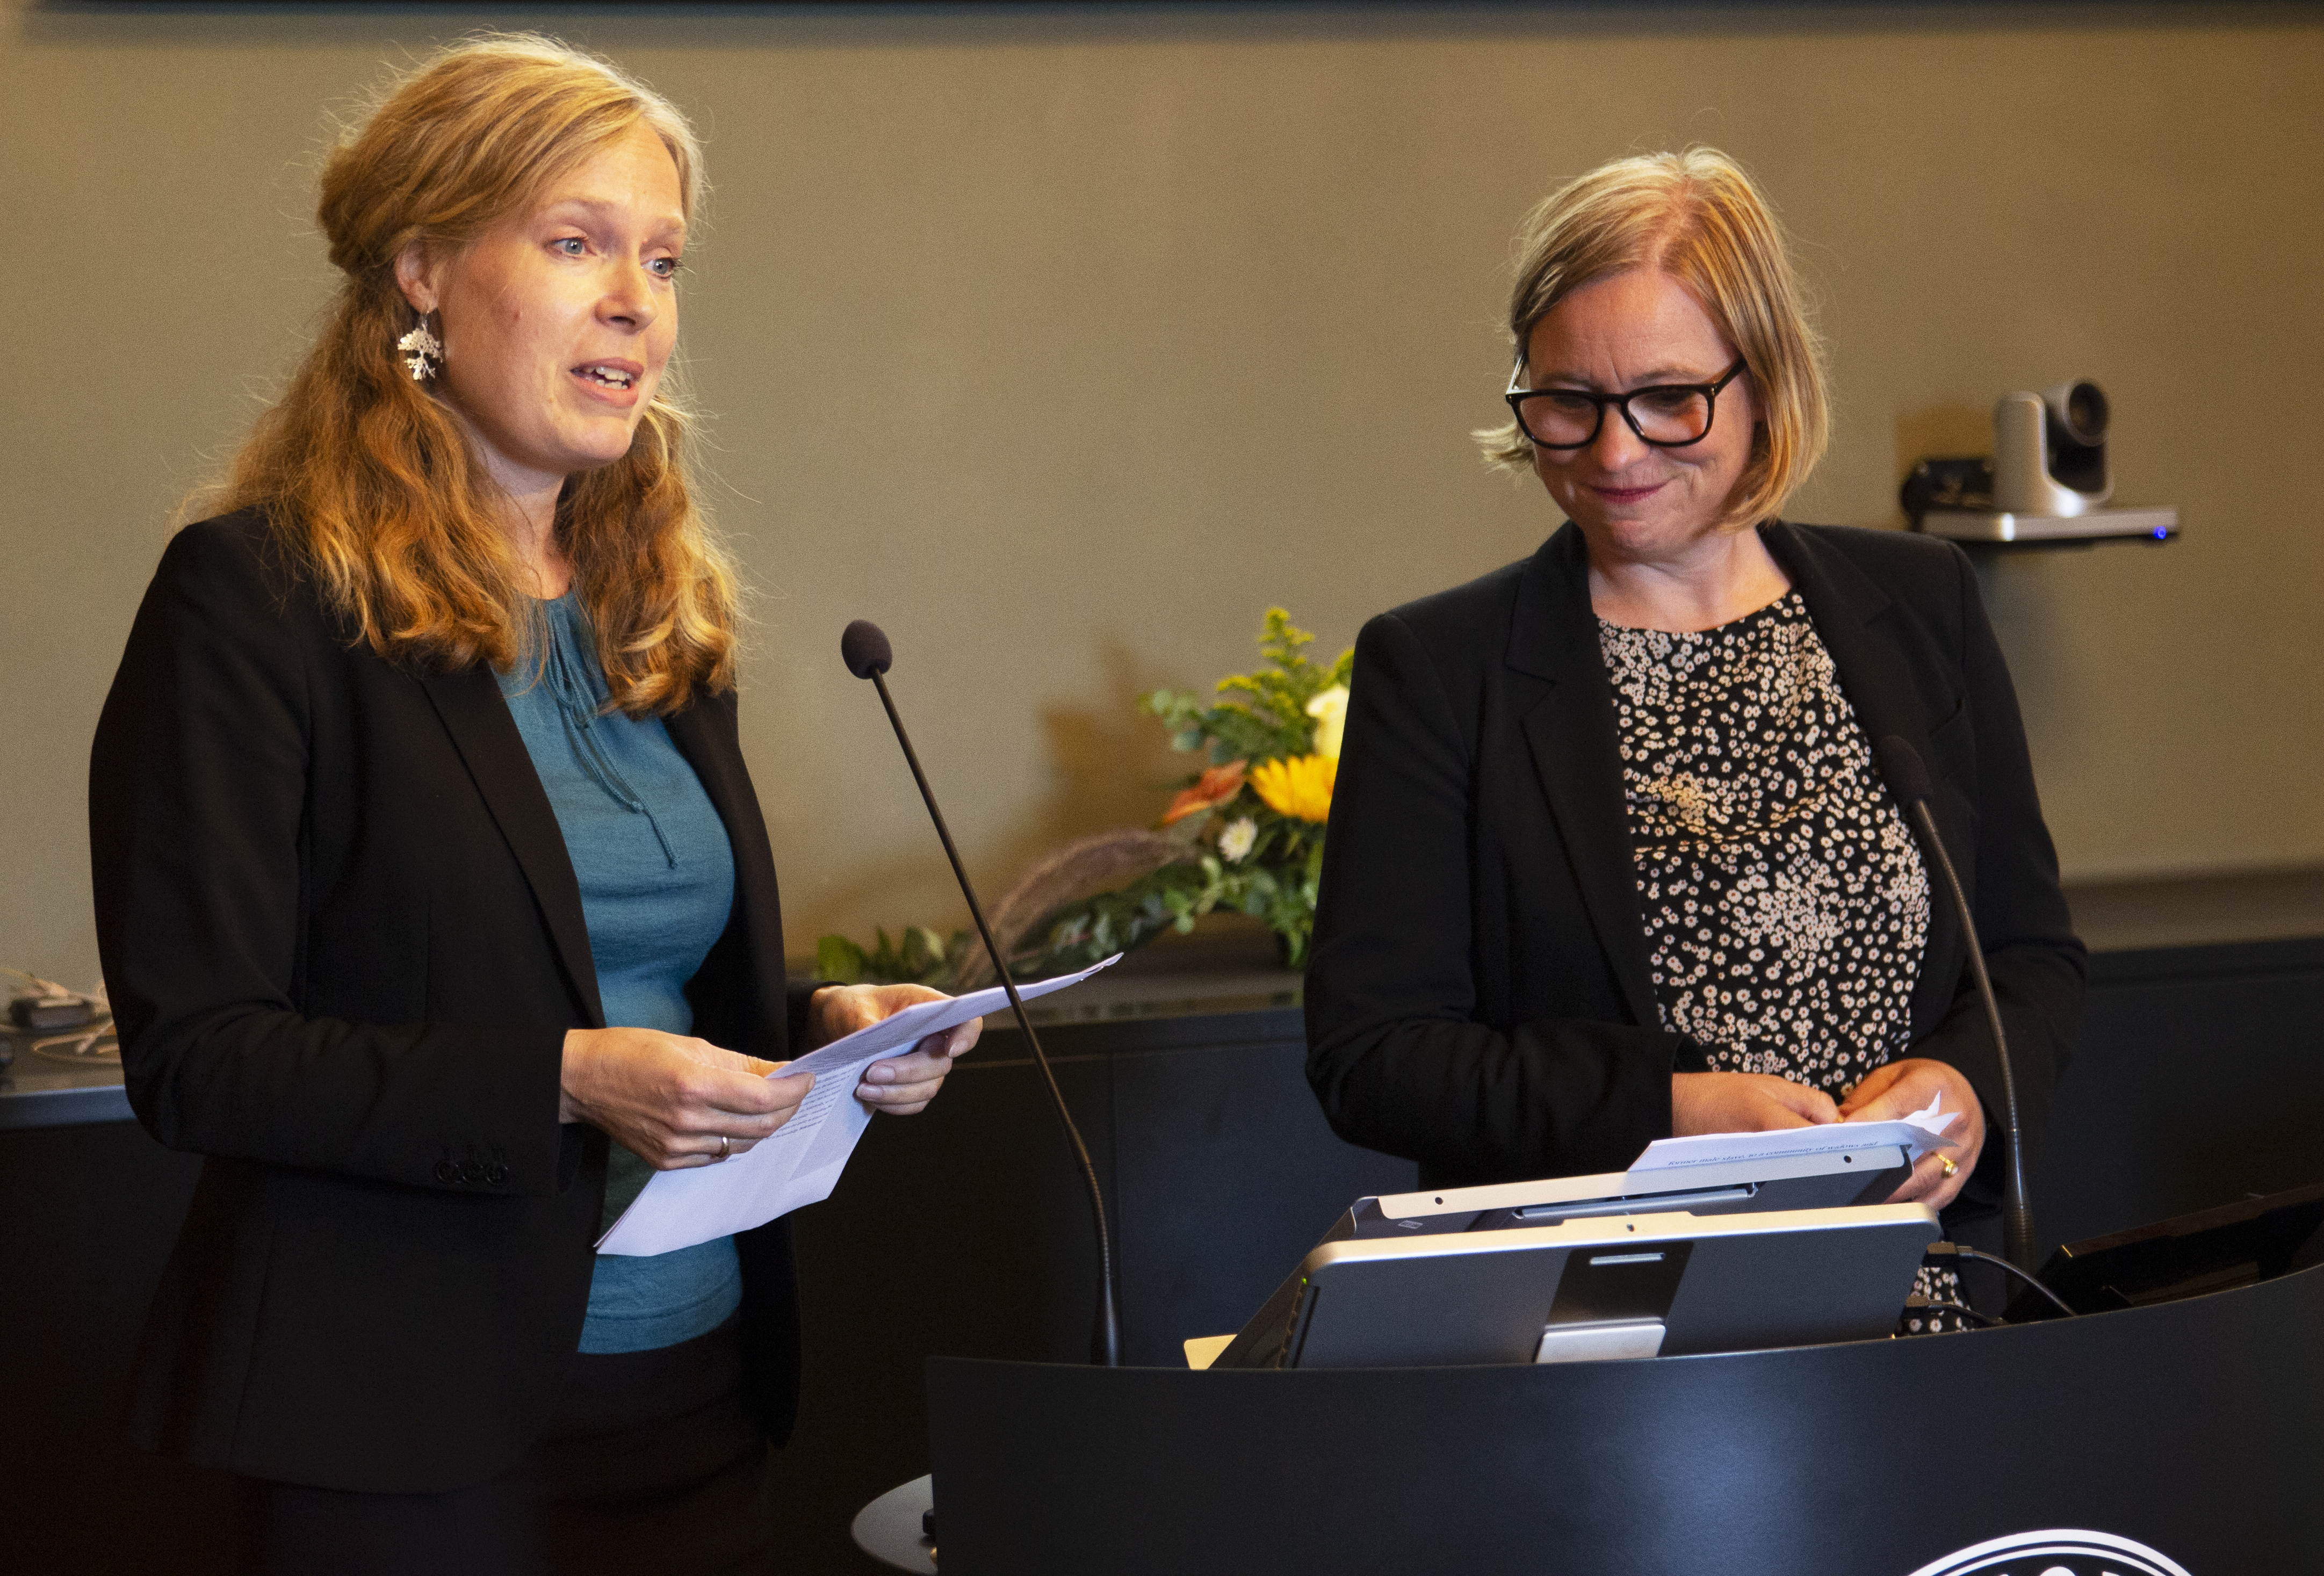 Liv Ingeborg Lied and Marianne Bjelland Kartzow during the CAS Opening Ceremony 2020, which was streamed on Facebook due to the Corona pandemic. Photo: Karoline K.Isaksen / Centre for Advanced Study (CAS)